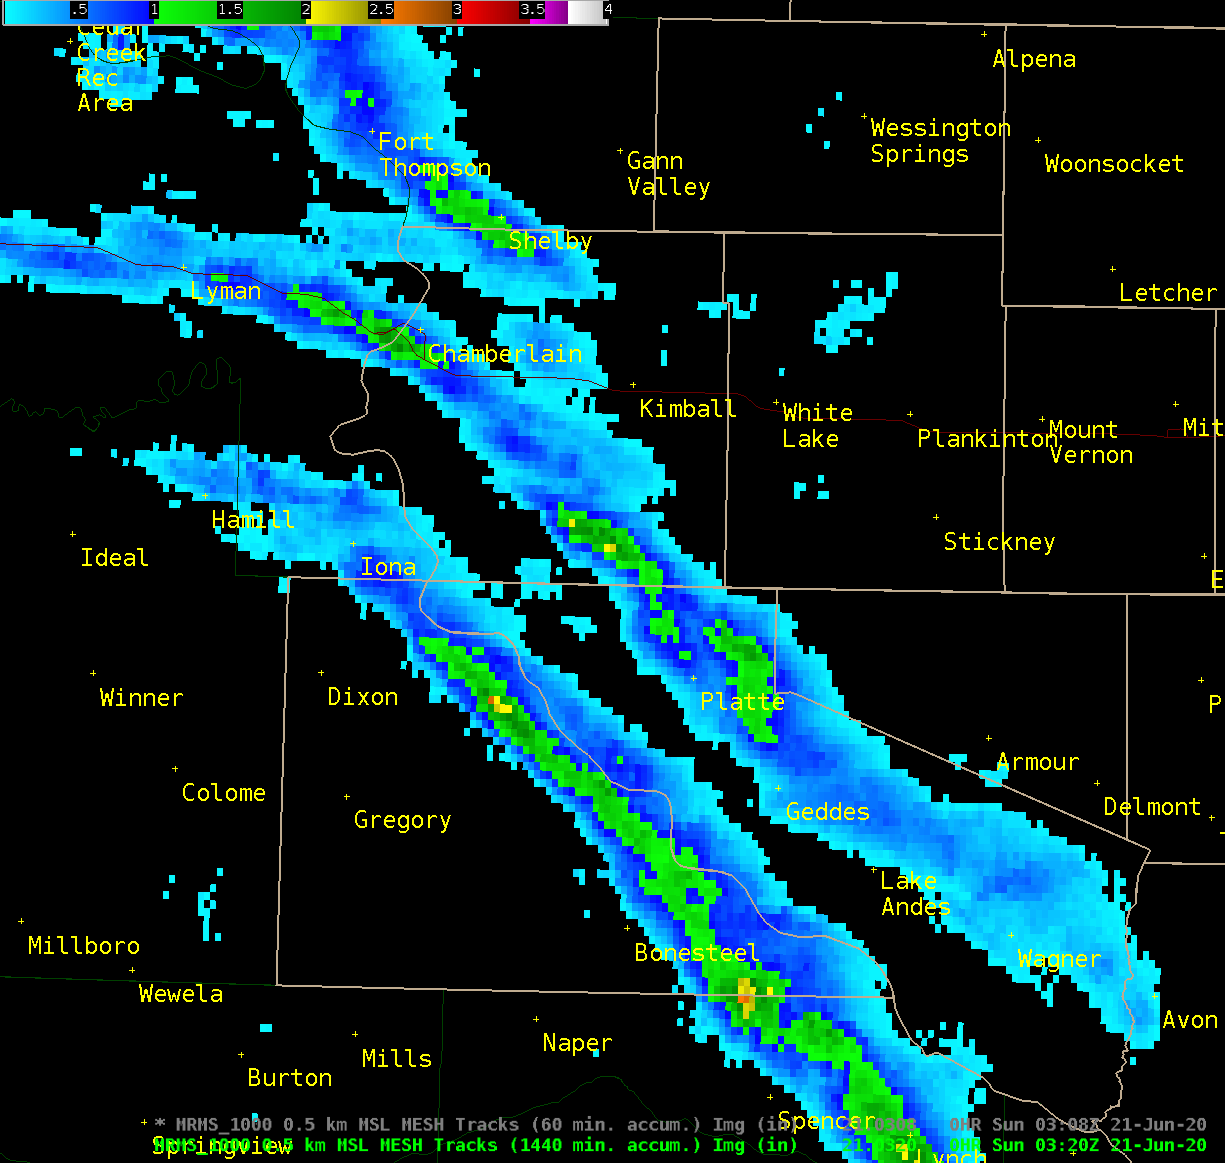 Map of Large Hail Tracks through Missouri River Valley.